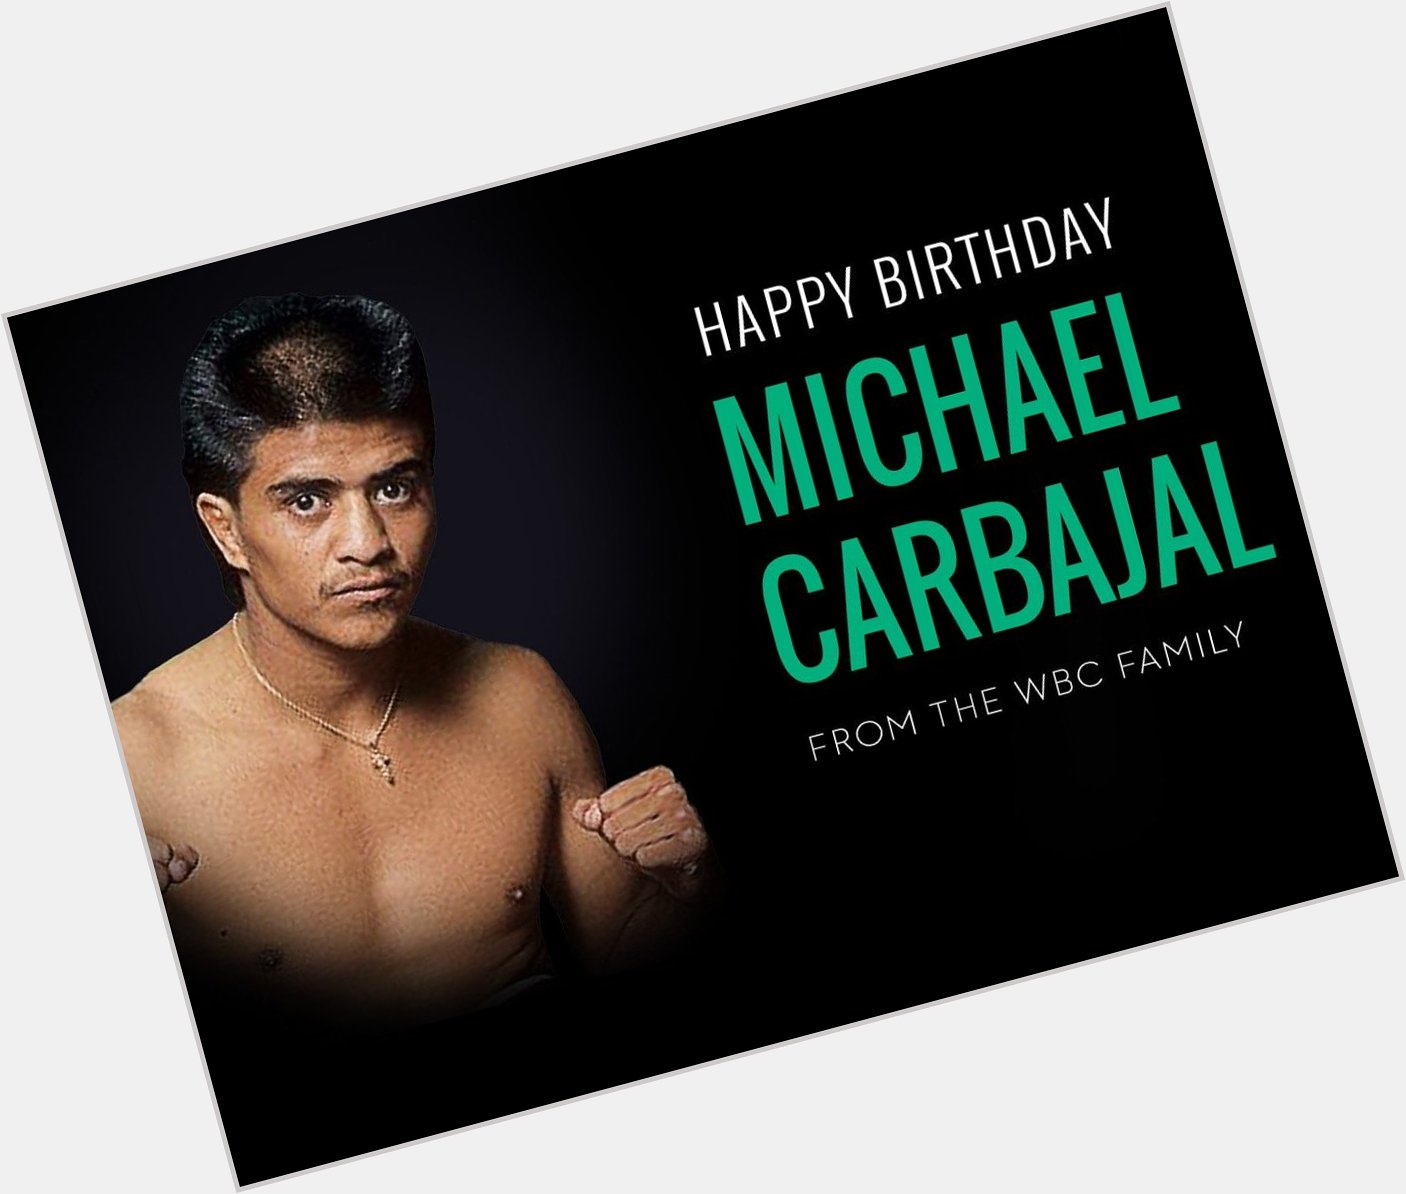 Happy birthday to the great Michael Carbajal !!!

May you have a wonderful day, champ!  